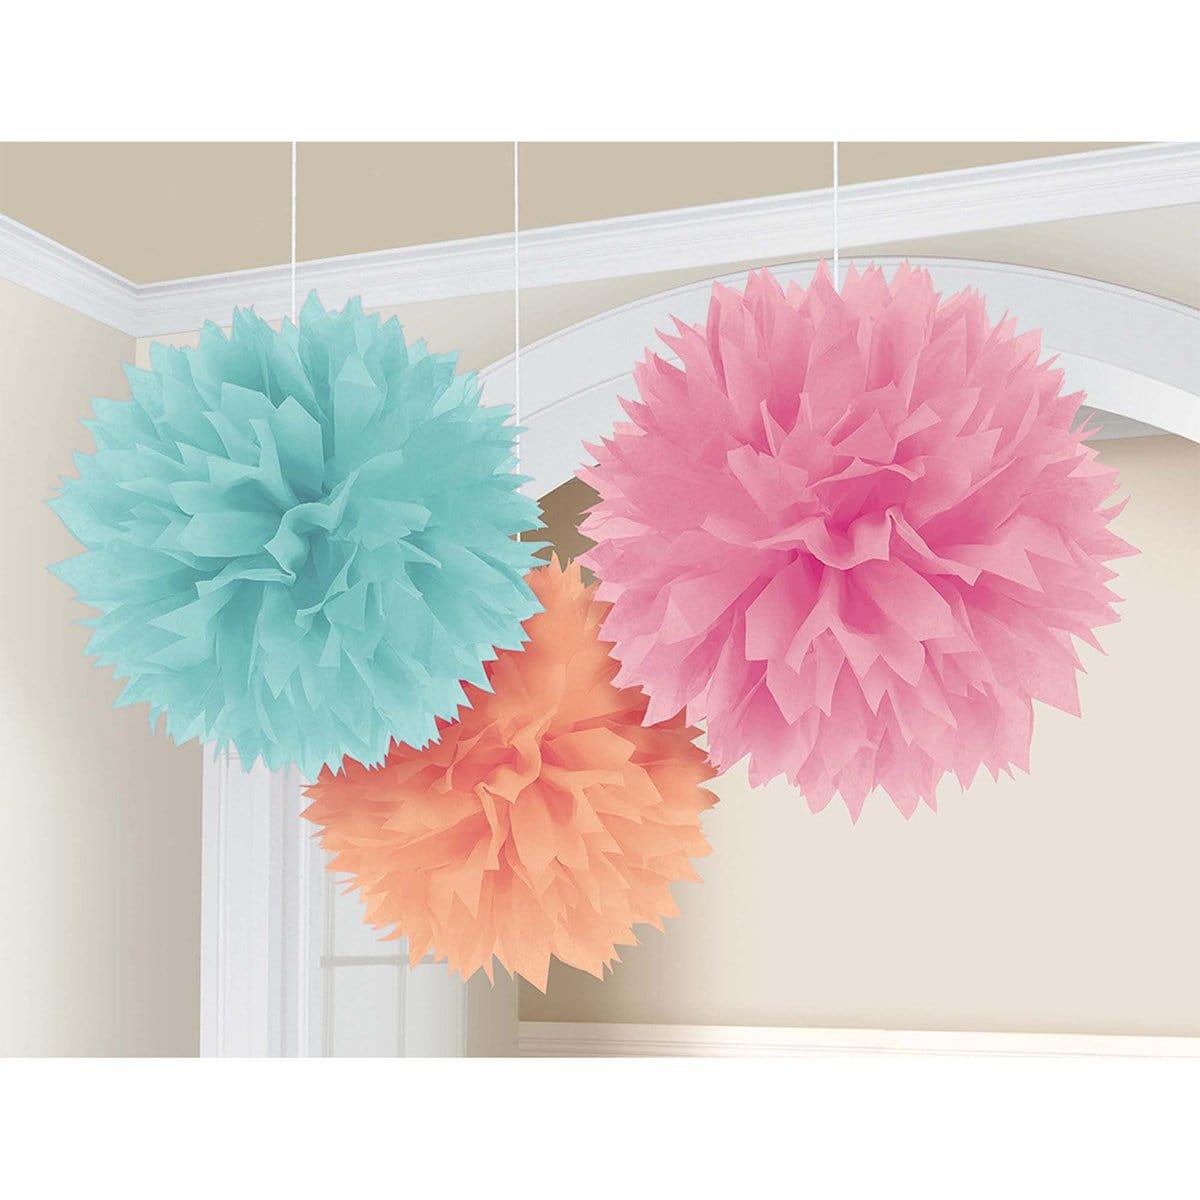 Buy Decorations Fluffy 3/pkg - Pastel sold at Party Expert